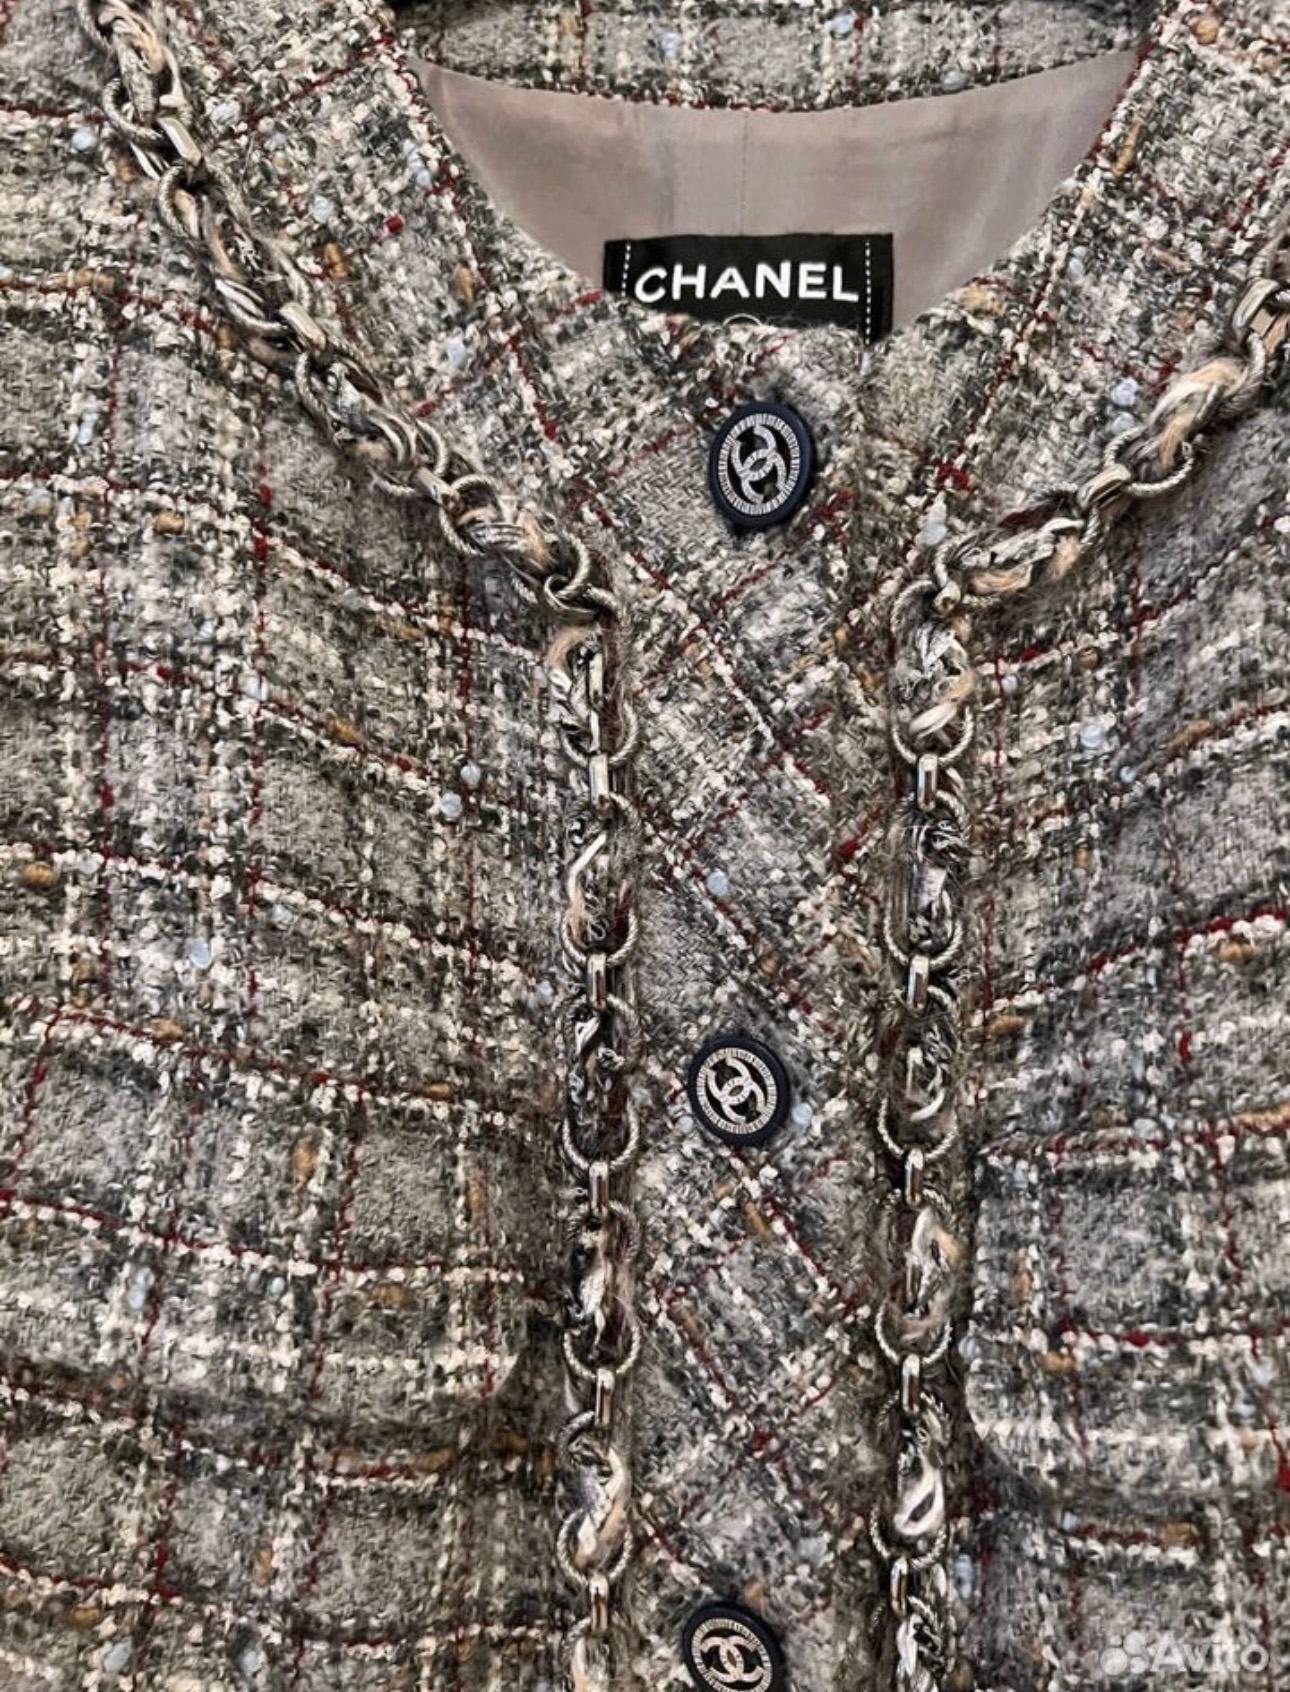 Rare Chanel blueish gray tweed jacket with signature metallic chain trim throughout.
- boutique price over 11,000$
- CC logo buttons
- iconic 4-pockets silhouette
- tonal silk lining
Size mark 38 FR. Pristine condition.